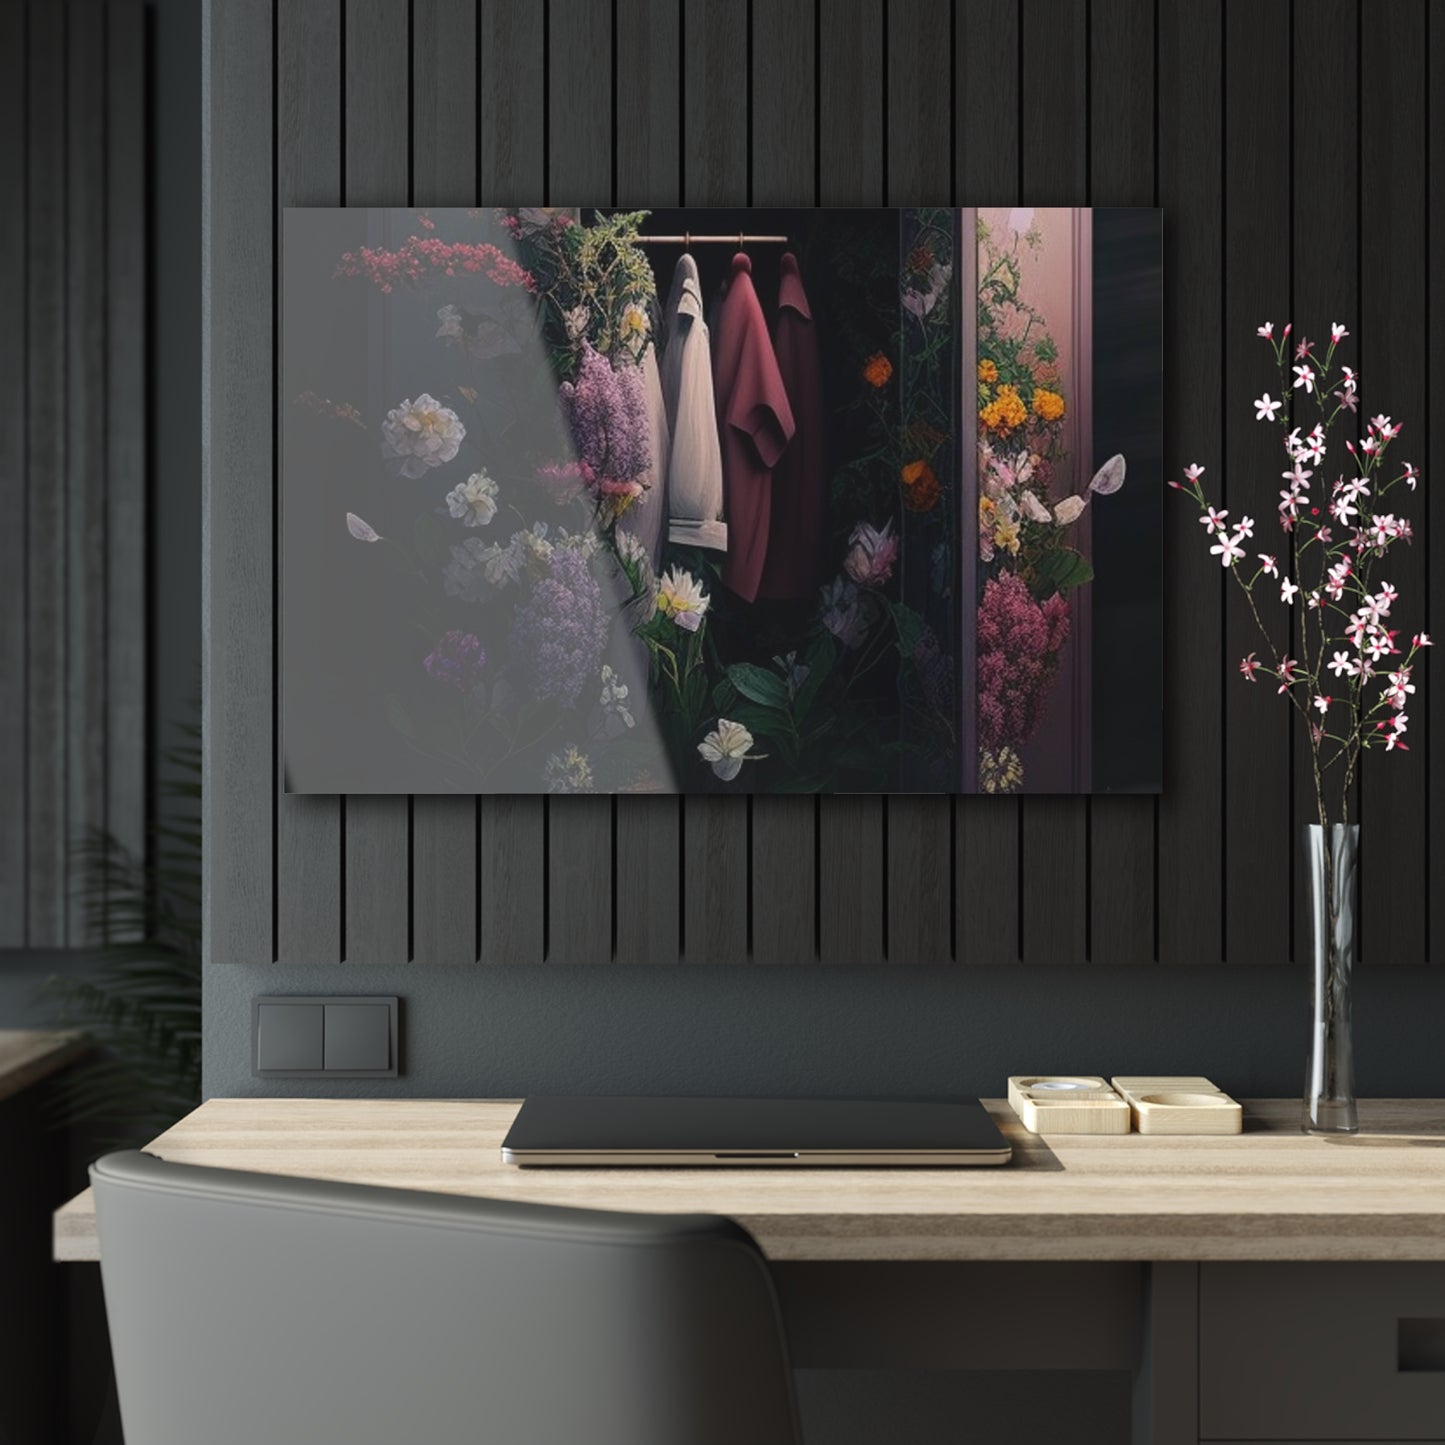 Acrylic Prints A Wardrobe Surrounded by Flowers 2